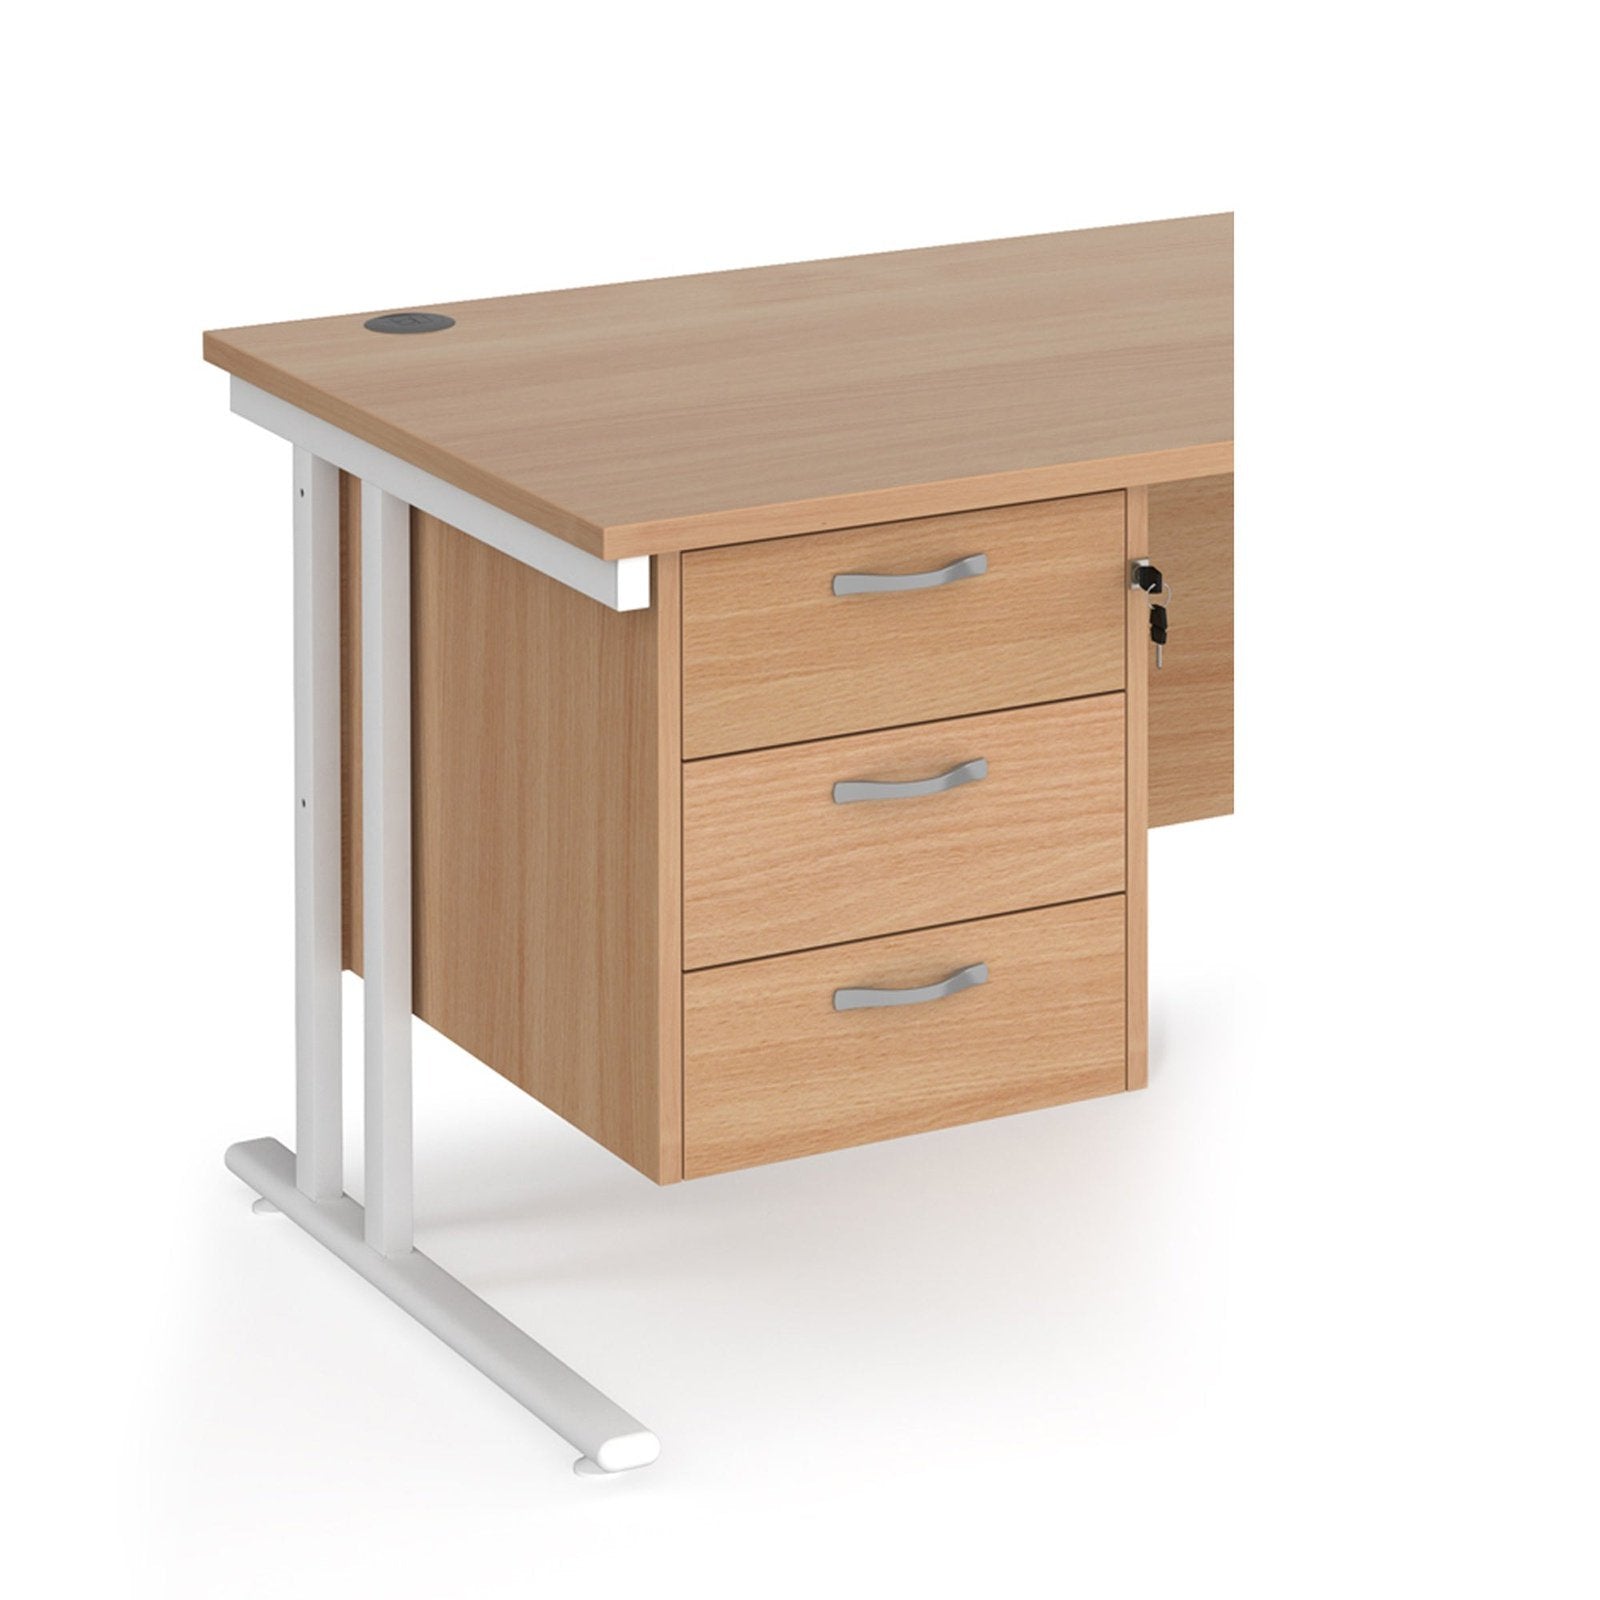 Maestro 25 fixed pedestal - Office Products Online